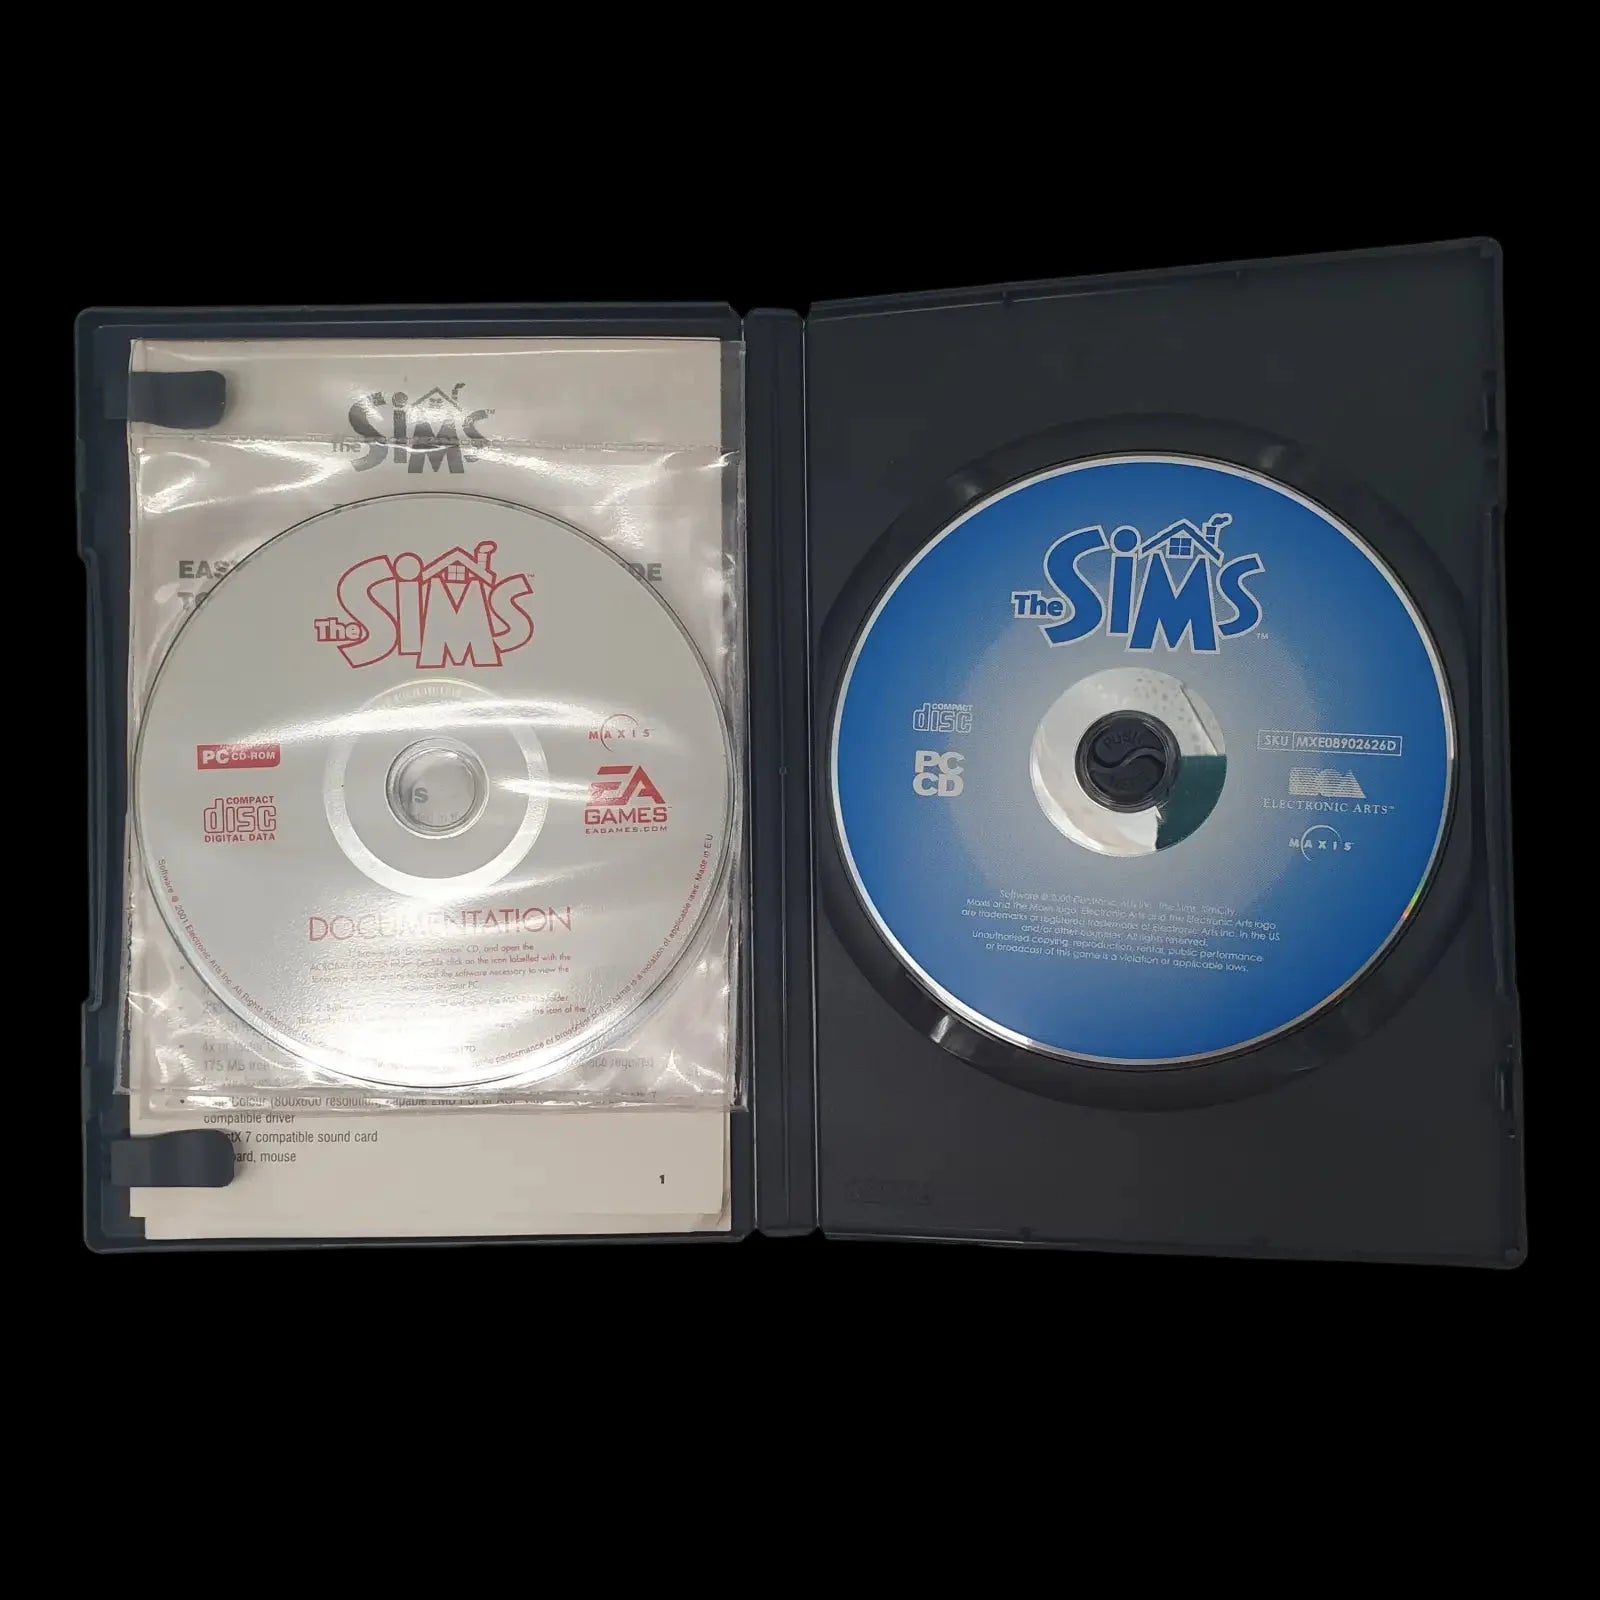 The Sims & Livin It Up Pc Ea Games 2001 Cib Video Game - EA